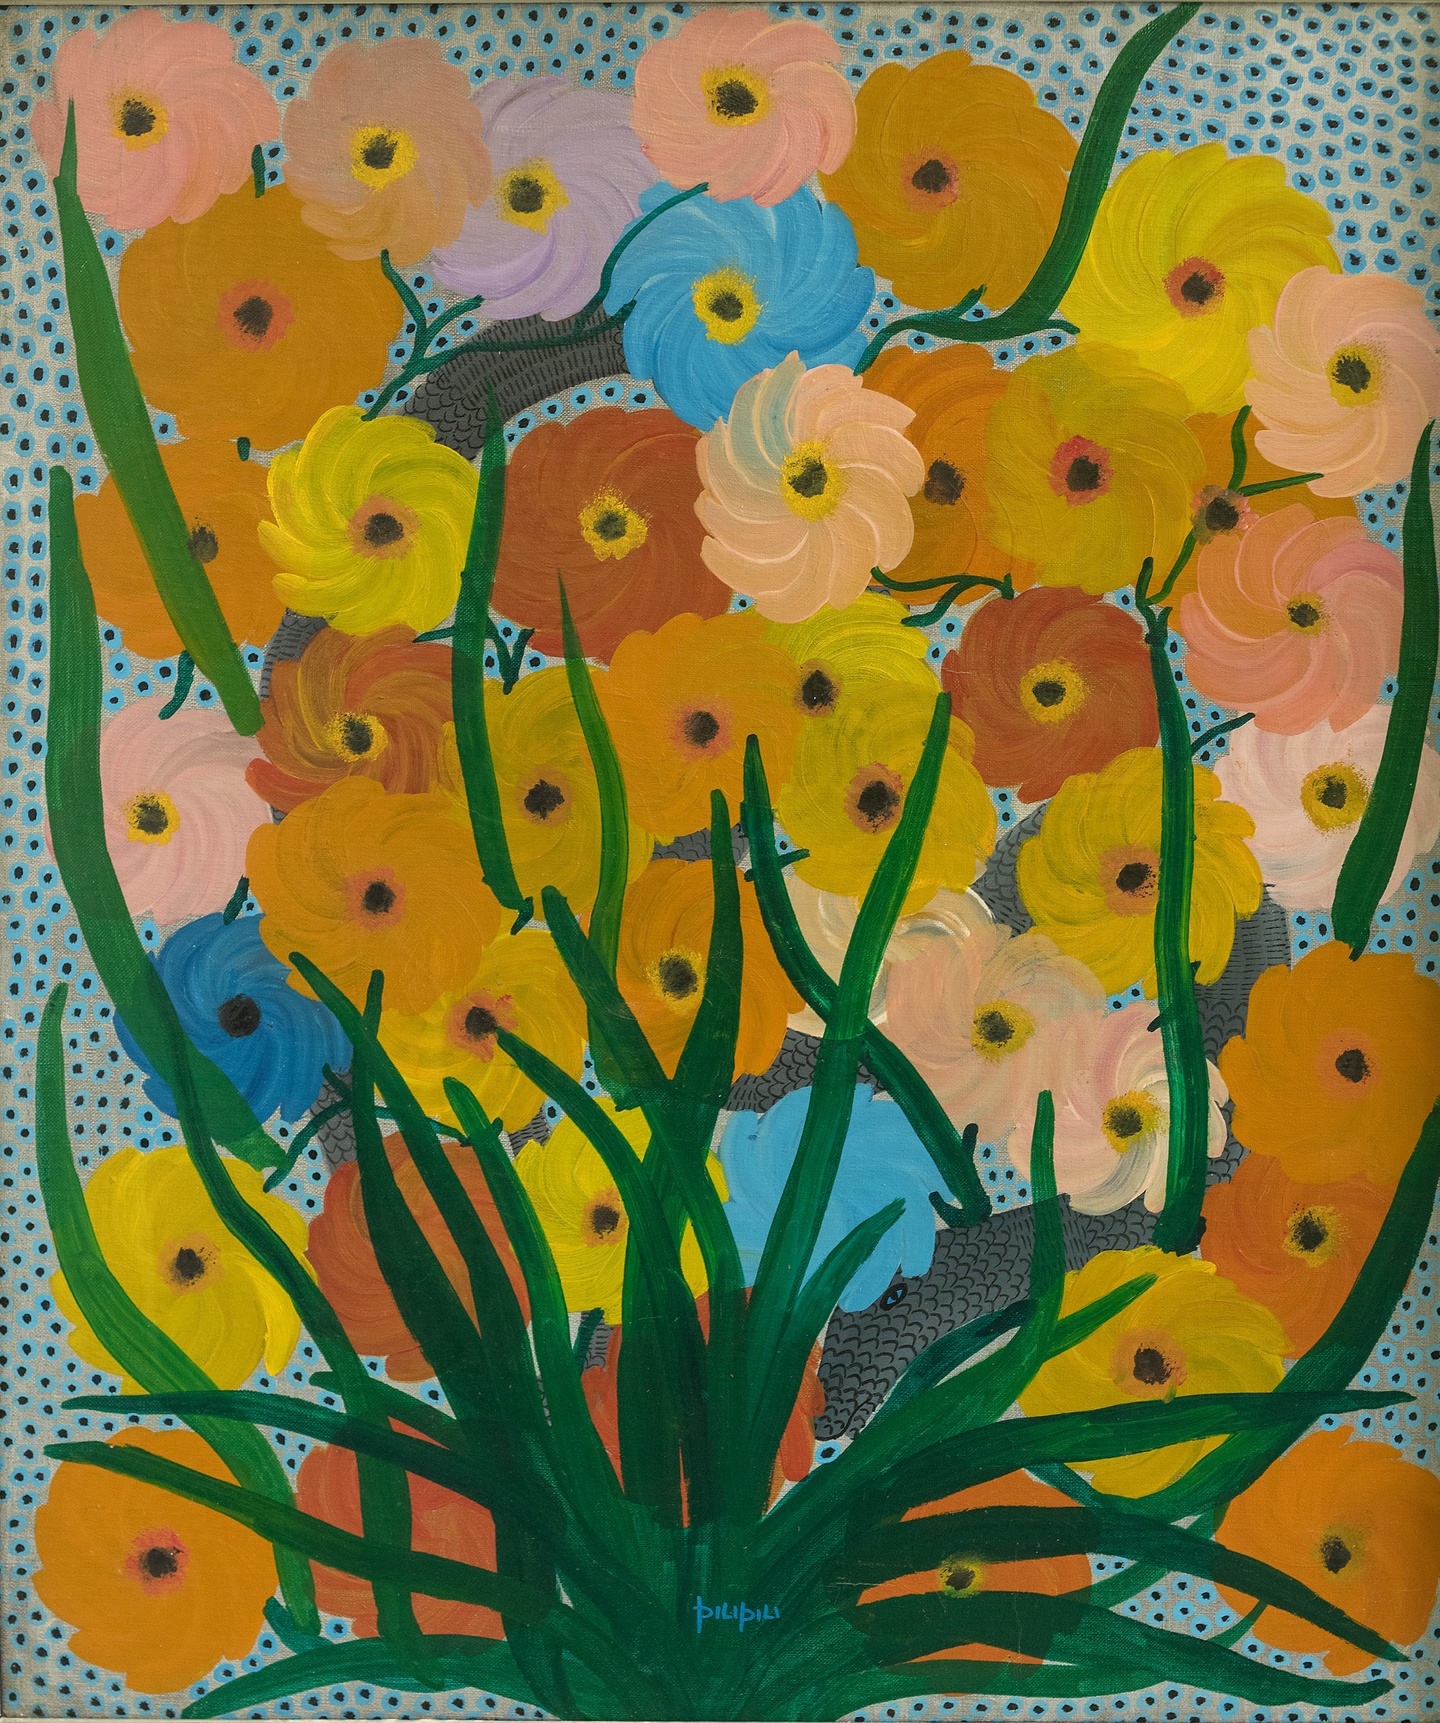 A painting of colorful flowers, vibrant green stems, and a gray snake woven amid them